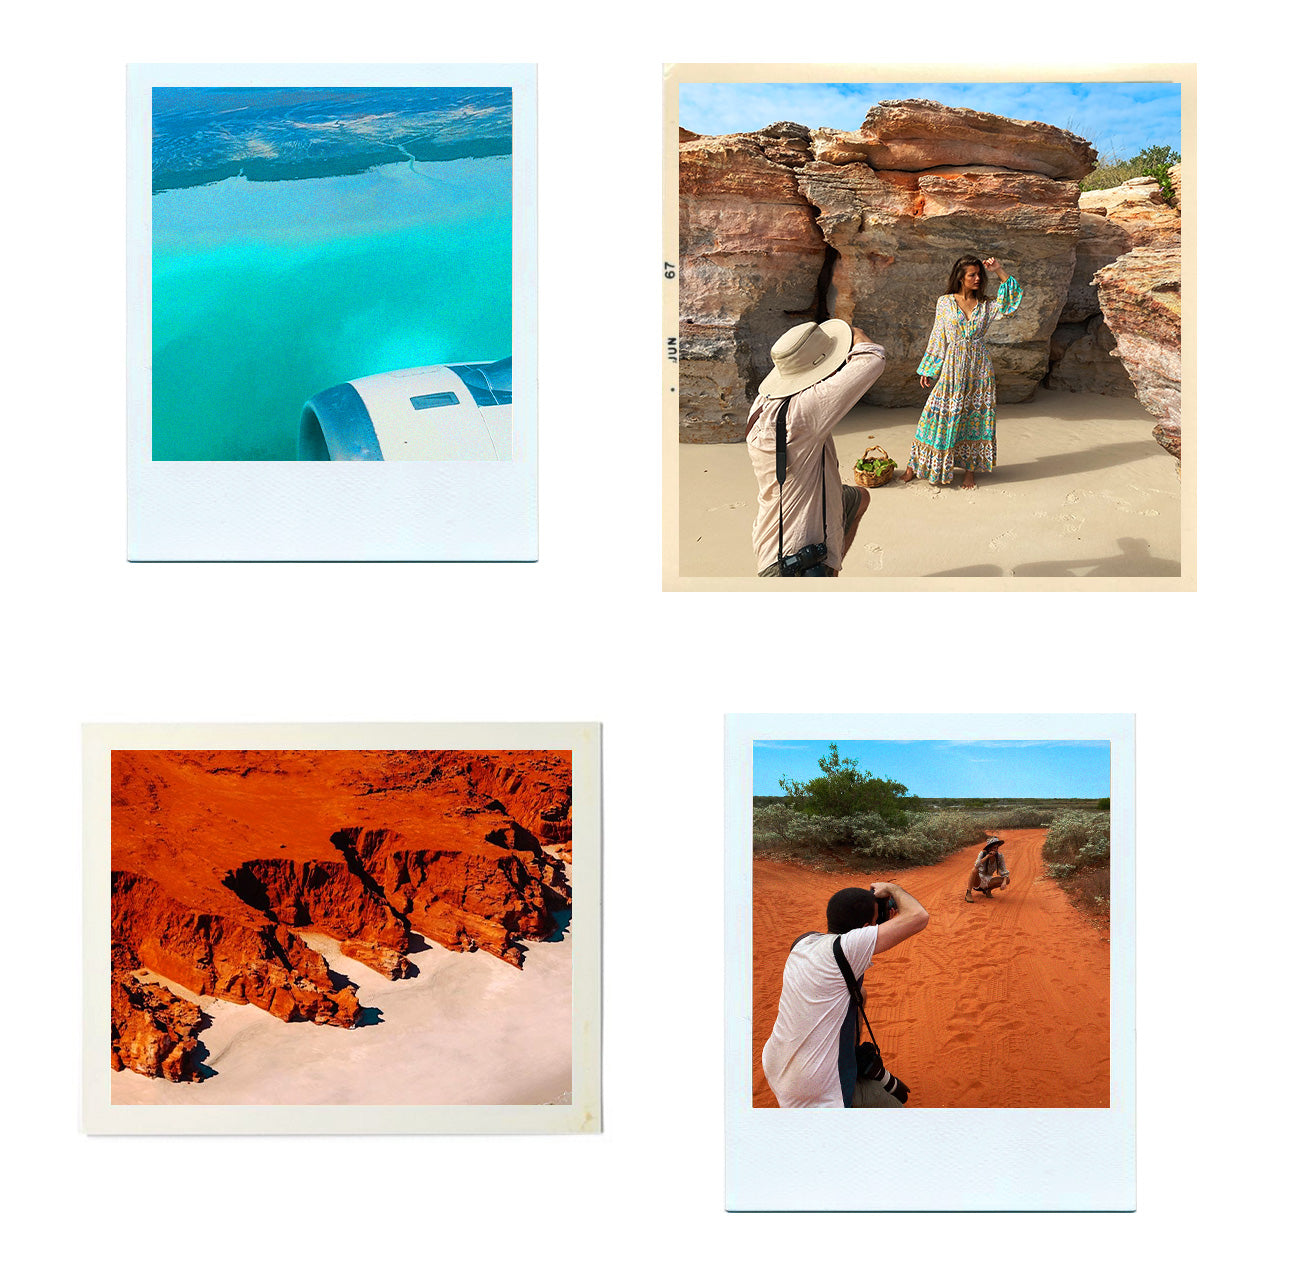 The Arnhem Team travelled to Cape Leveque in WA to shoot the Forget Me Not Campaign